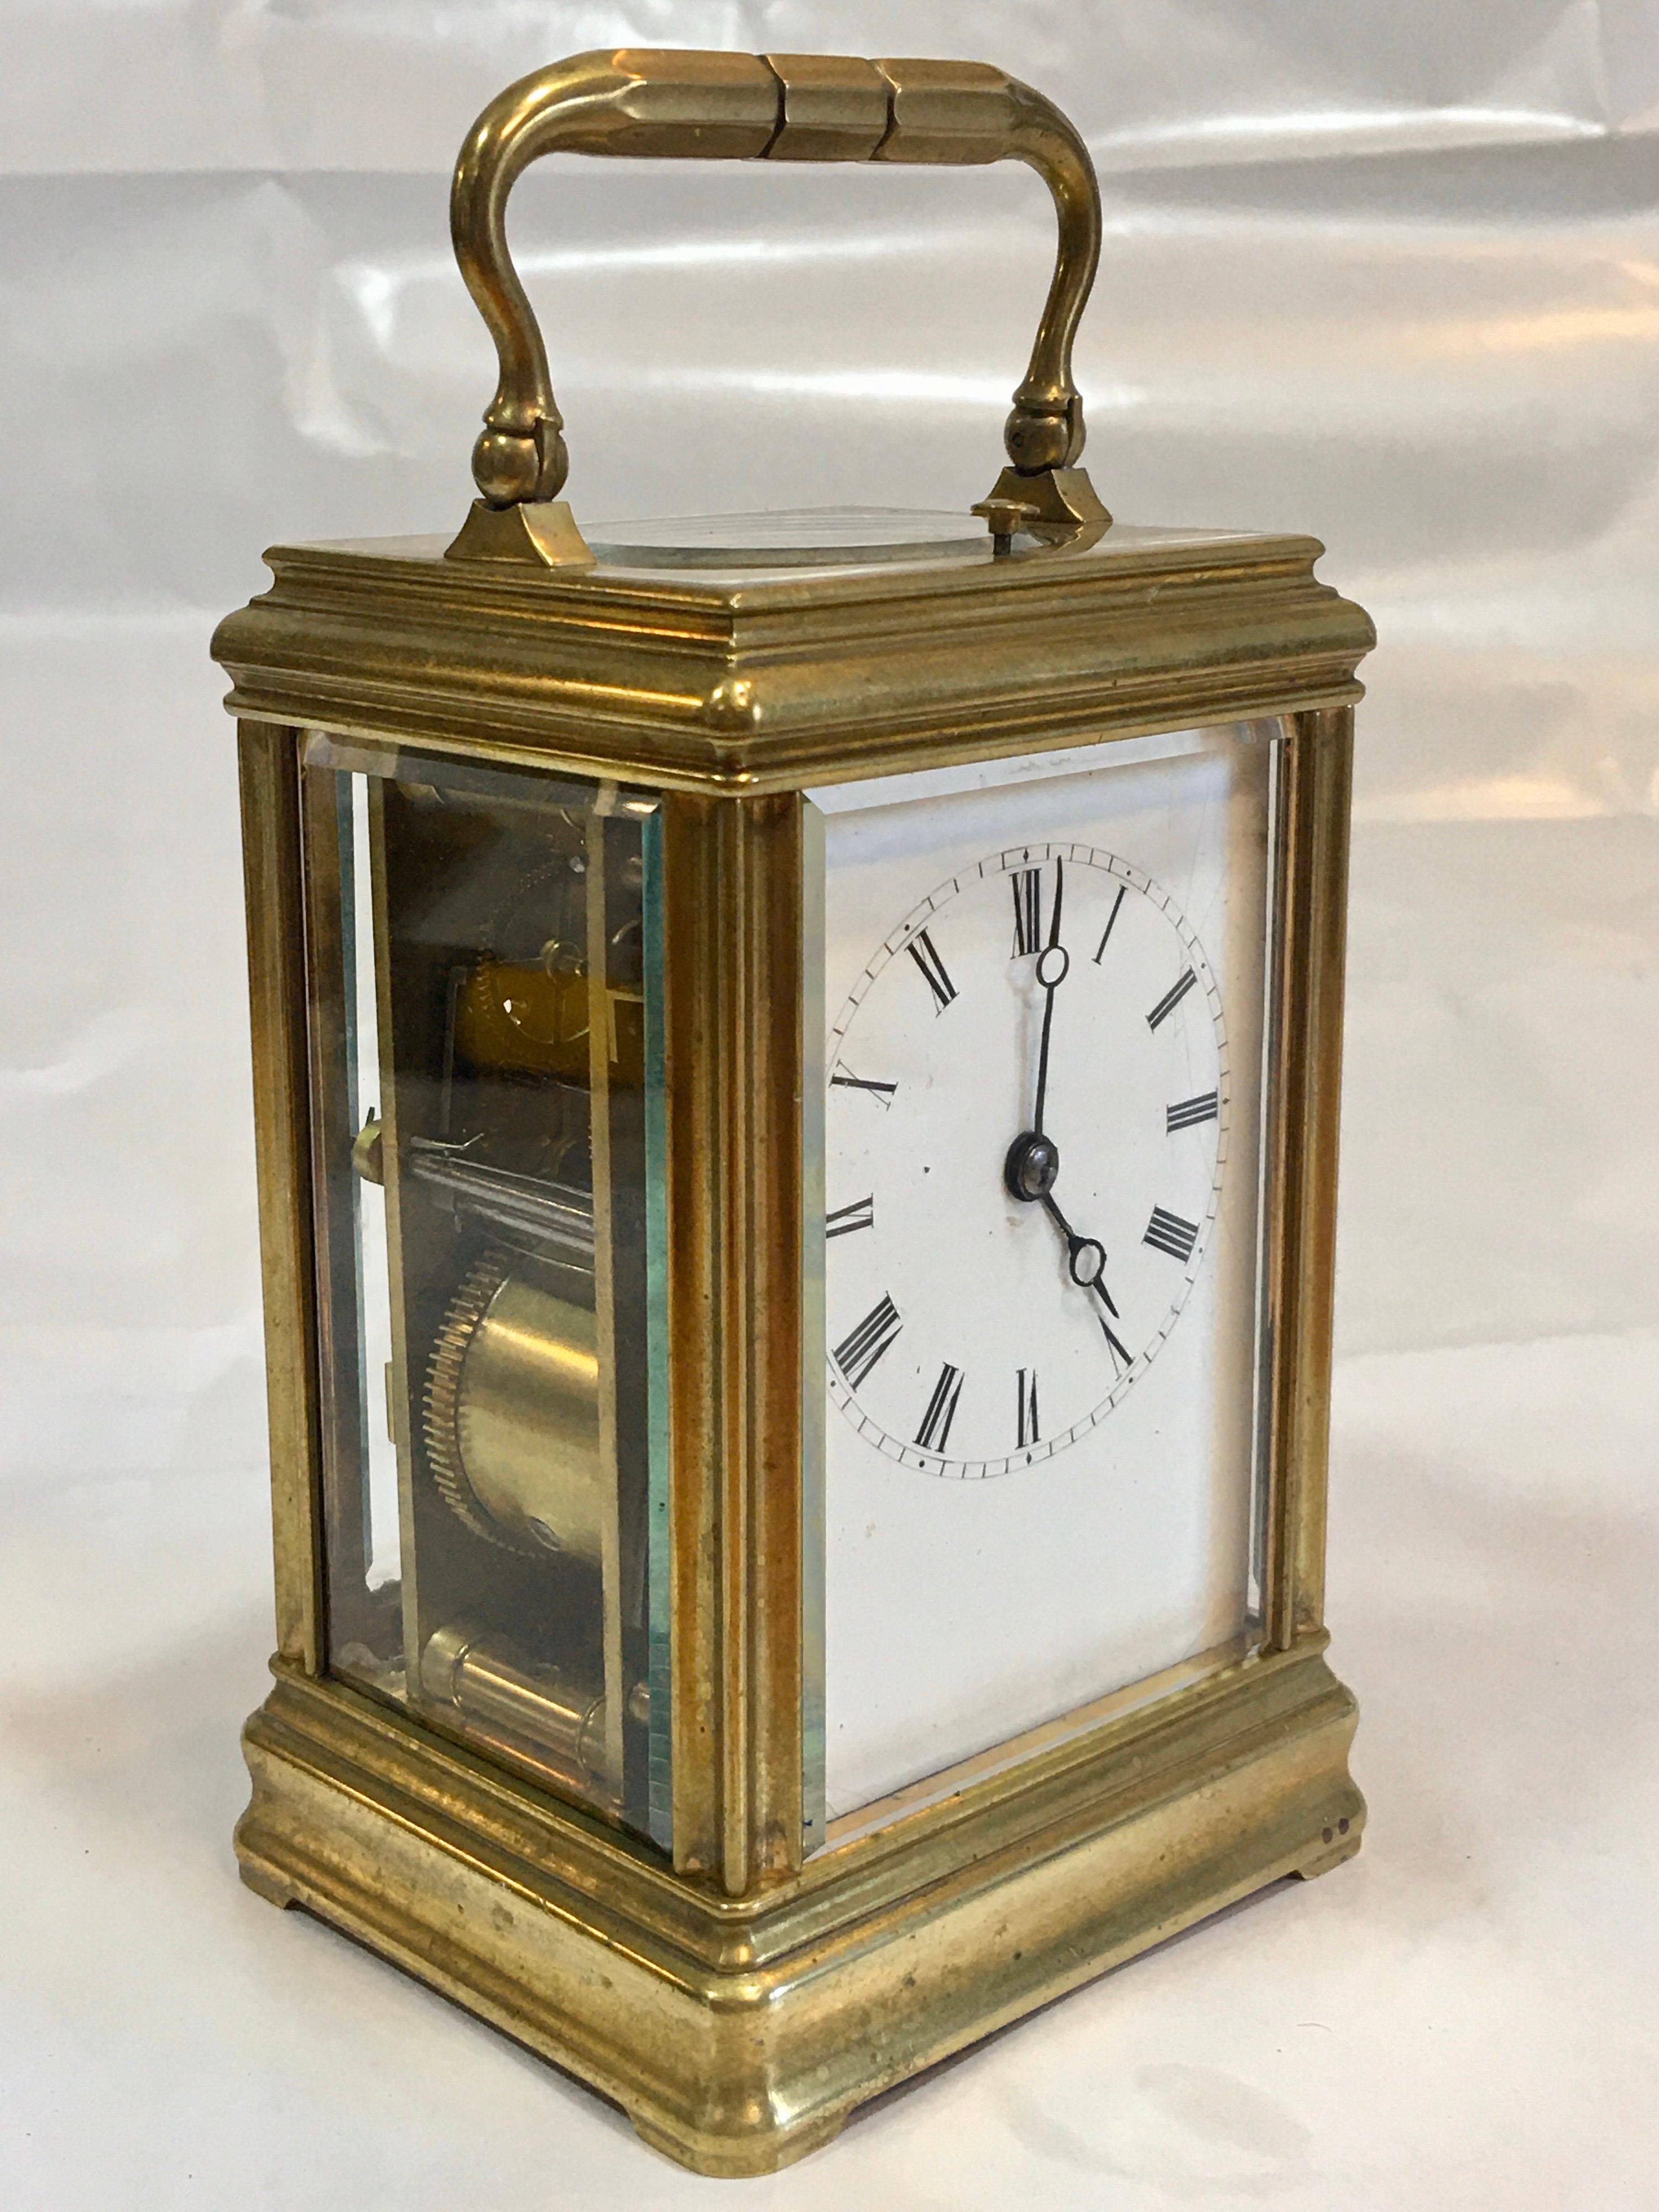 This beautiful antique timepiece is in good working condition and it strikes on a gong. some signs of ageing and wear as shown.

Please study the images carefully as form part of the description.